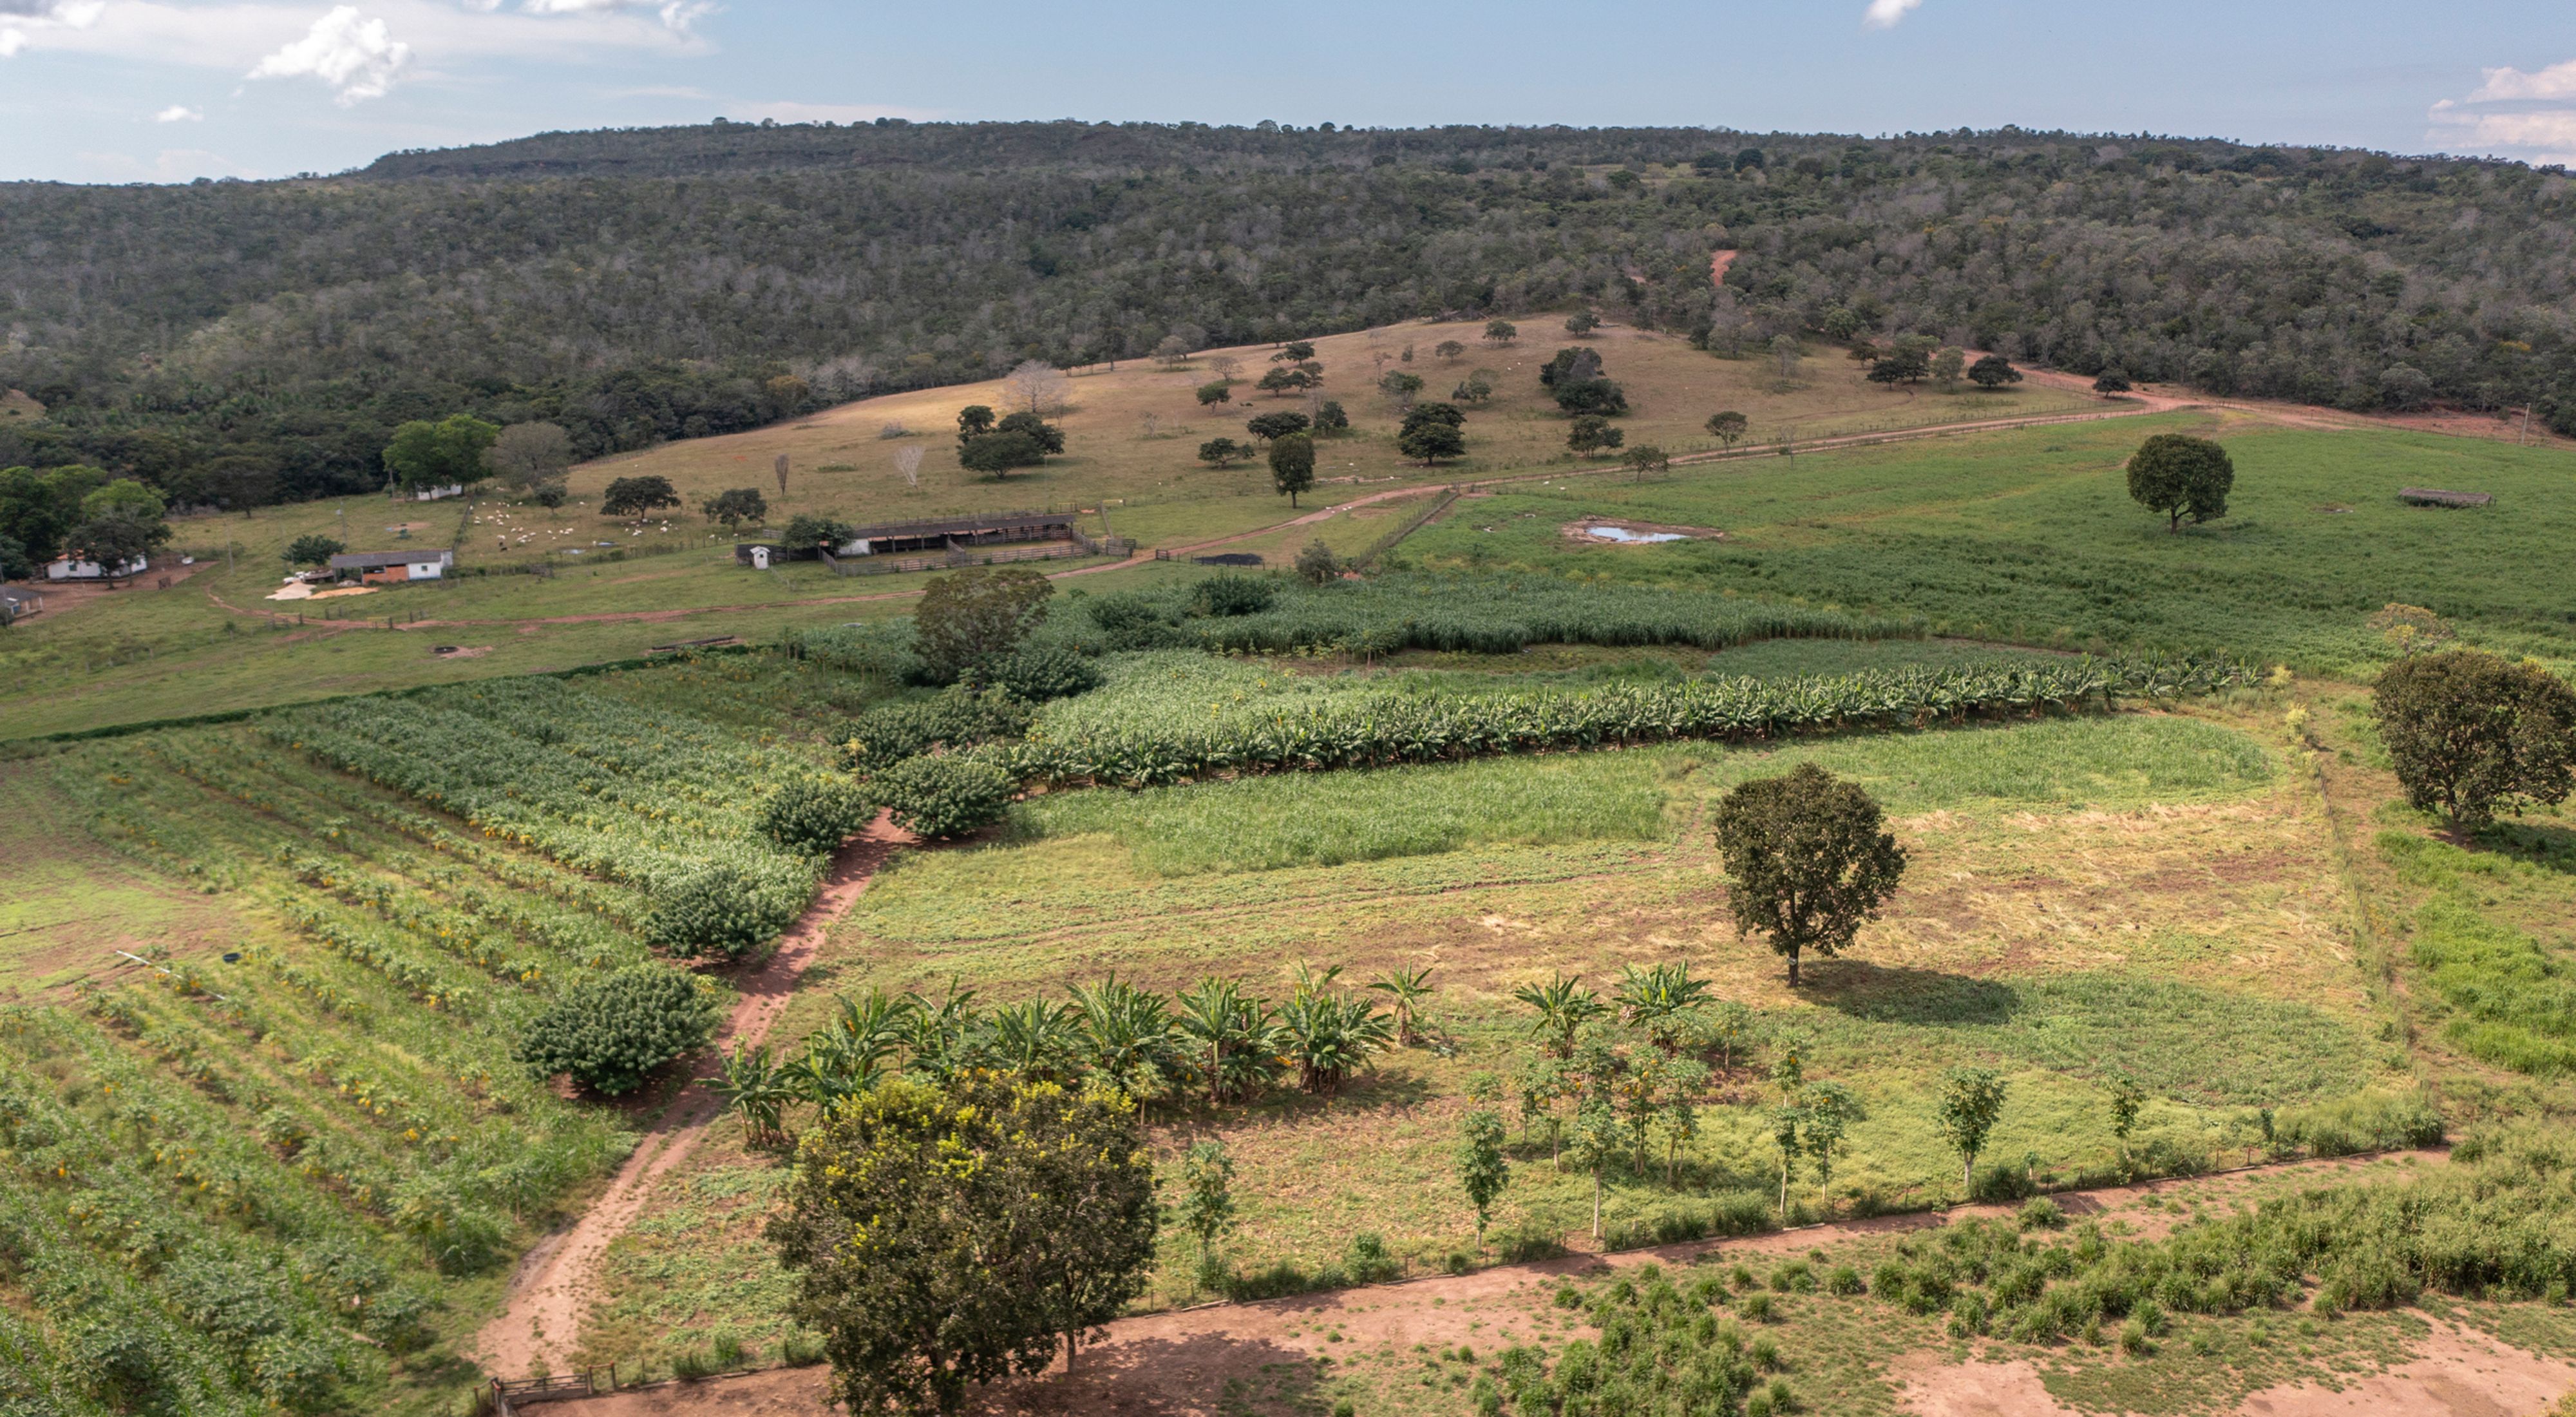 Aerial view of rural property in Mato Grosso state, Brazil.